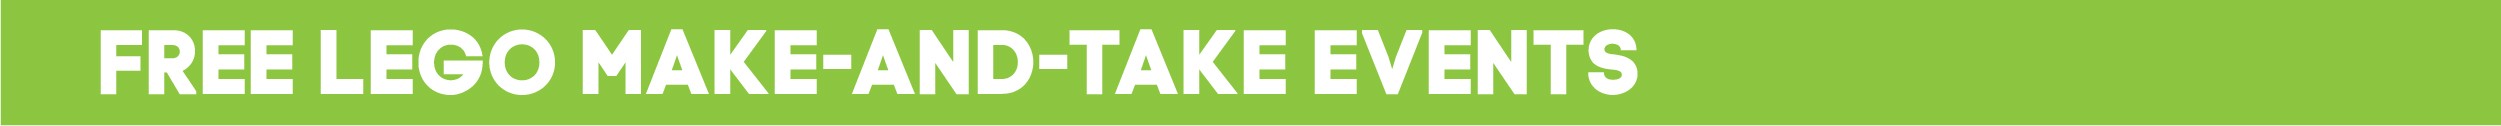 FREE Lego Make and Take Events banner